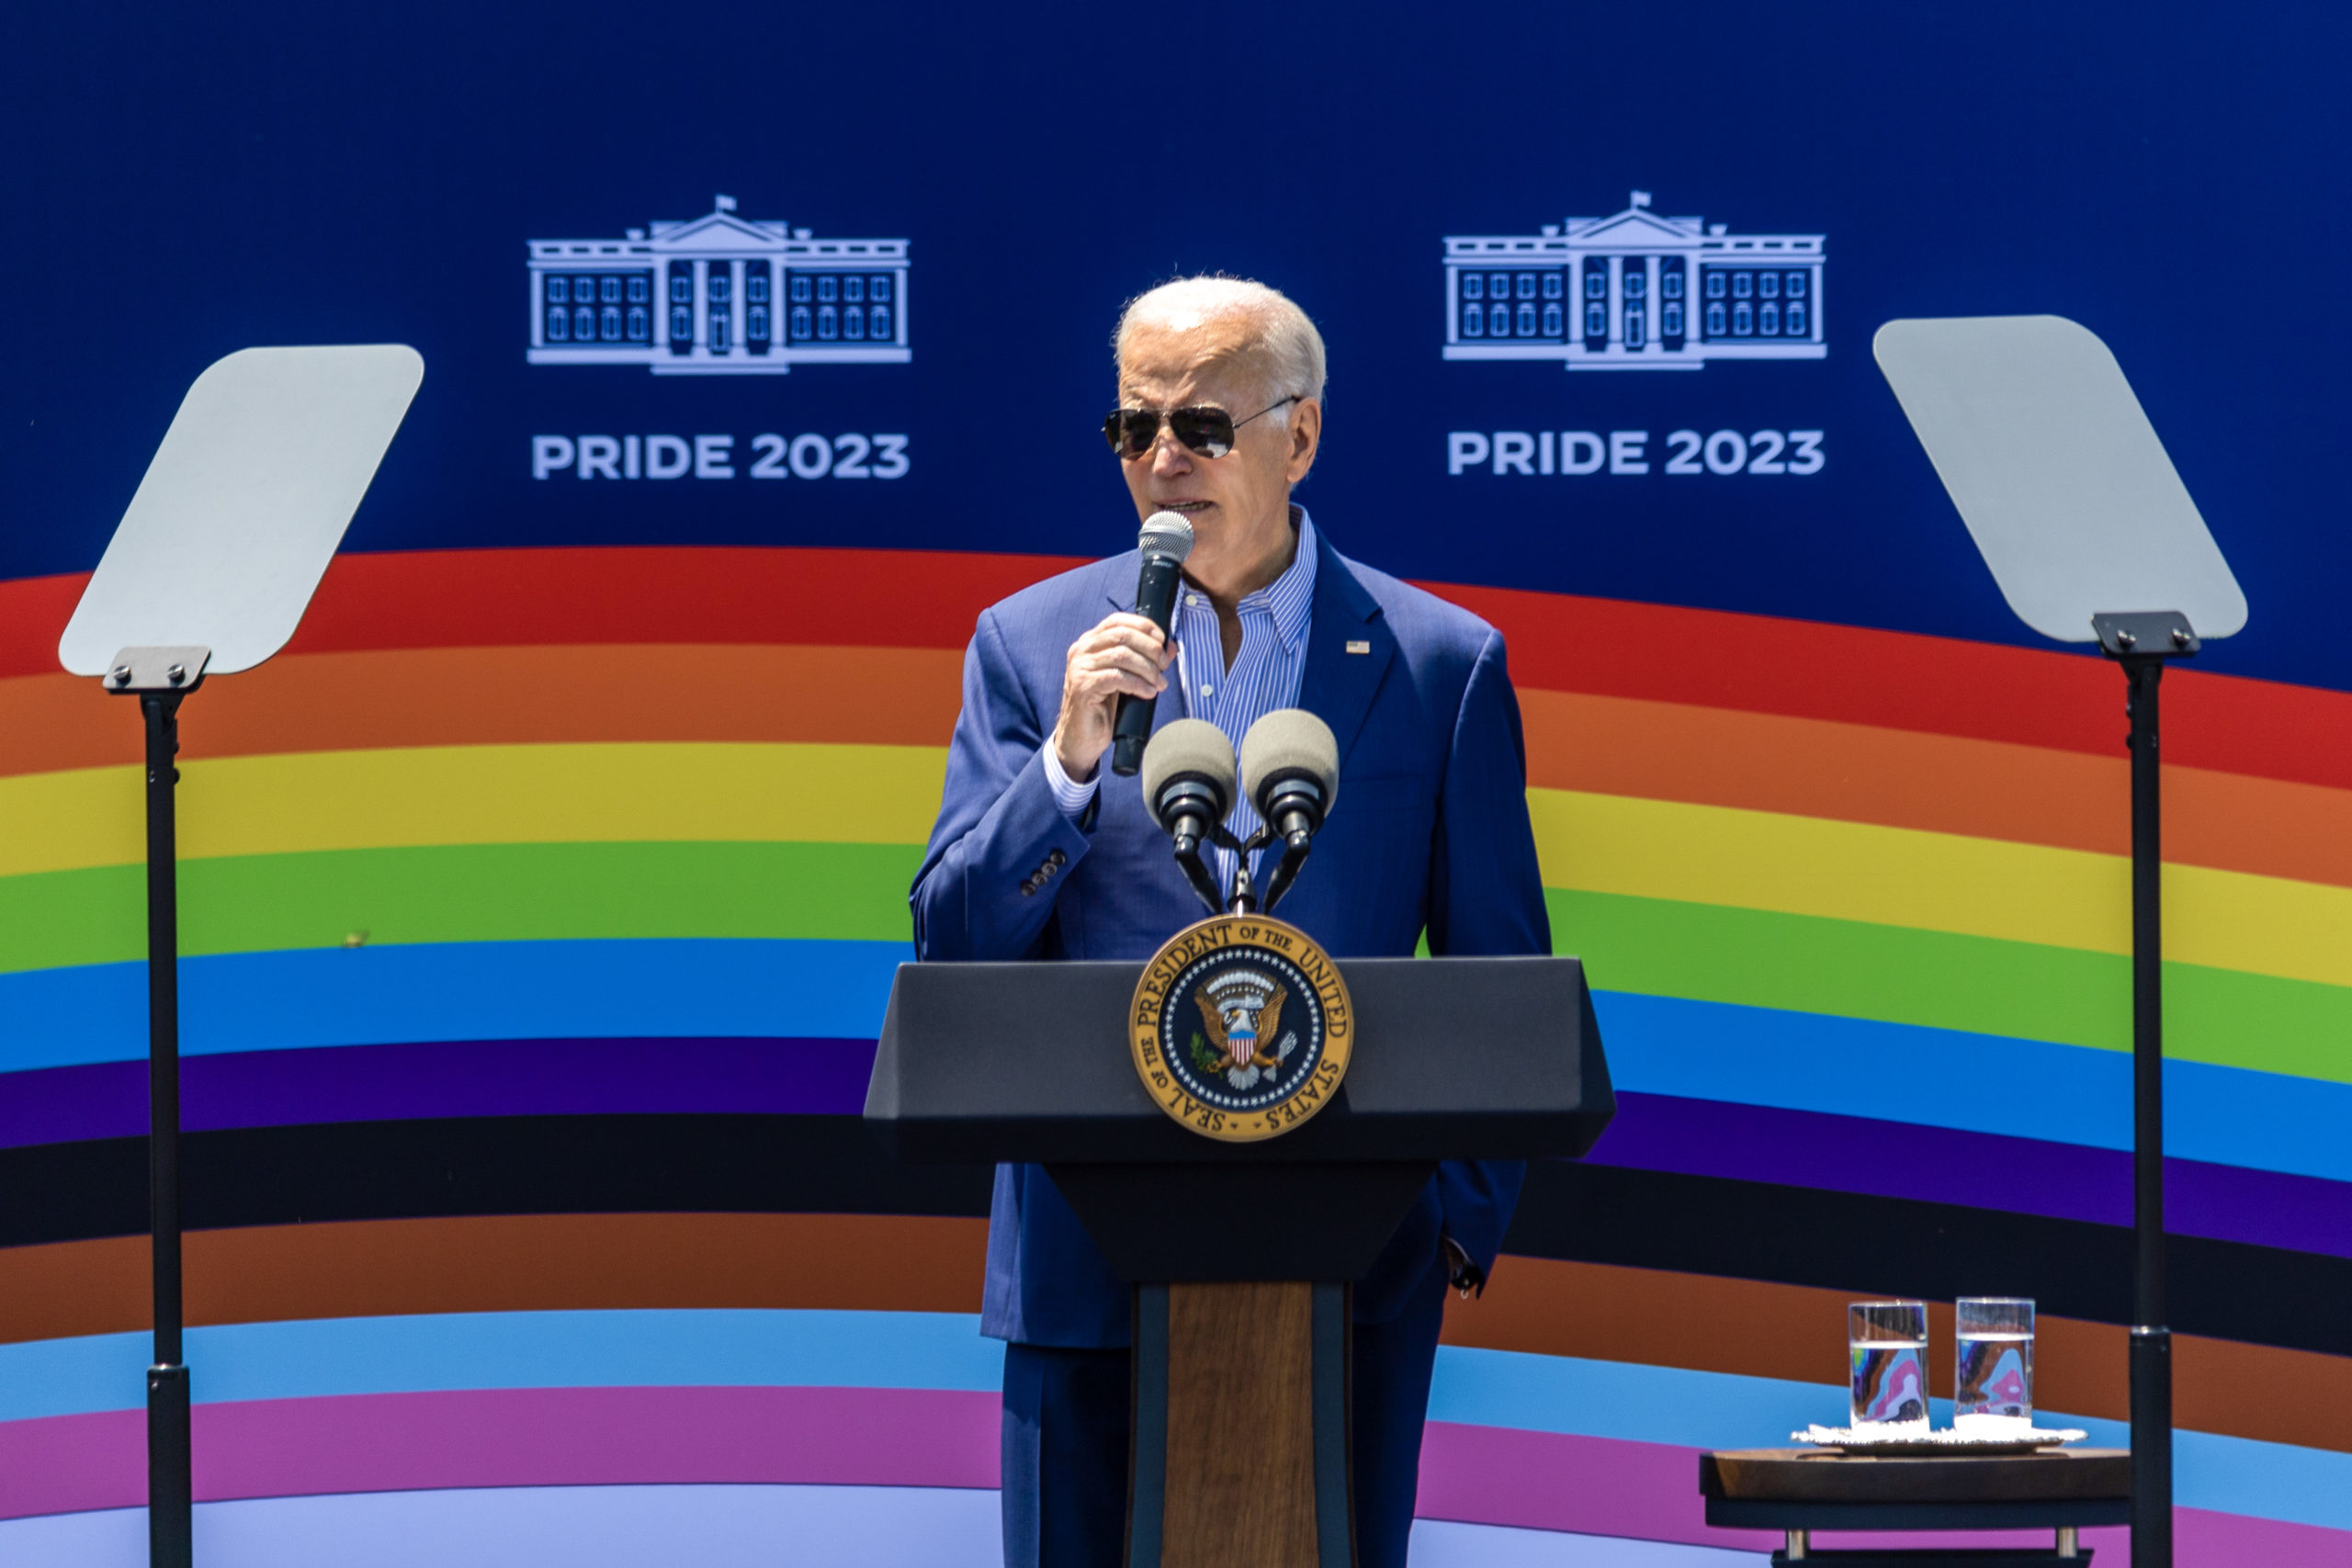 WASHINGTON, DC - JUNE 10: US President Joe Biden speaks at the Pride Month celebration on the South Lawn of the White House on June 10, 2023 in Washington, DC. Thousands of people came to the white house to celebrate pride month with a performance by singer Betty Who. (Photo by Tasos Katopodis/Getty Images)